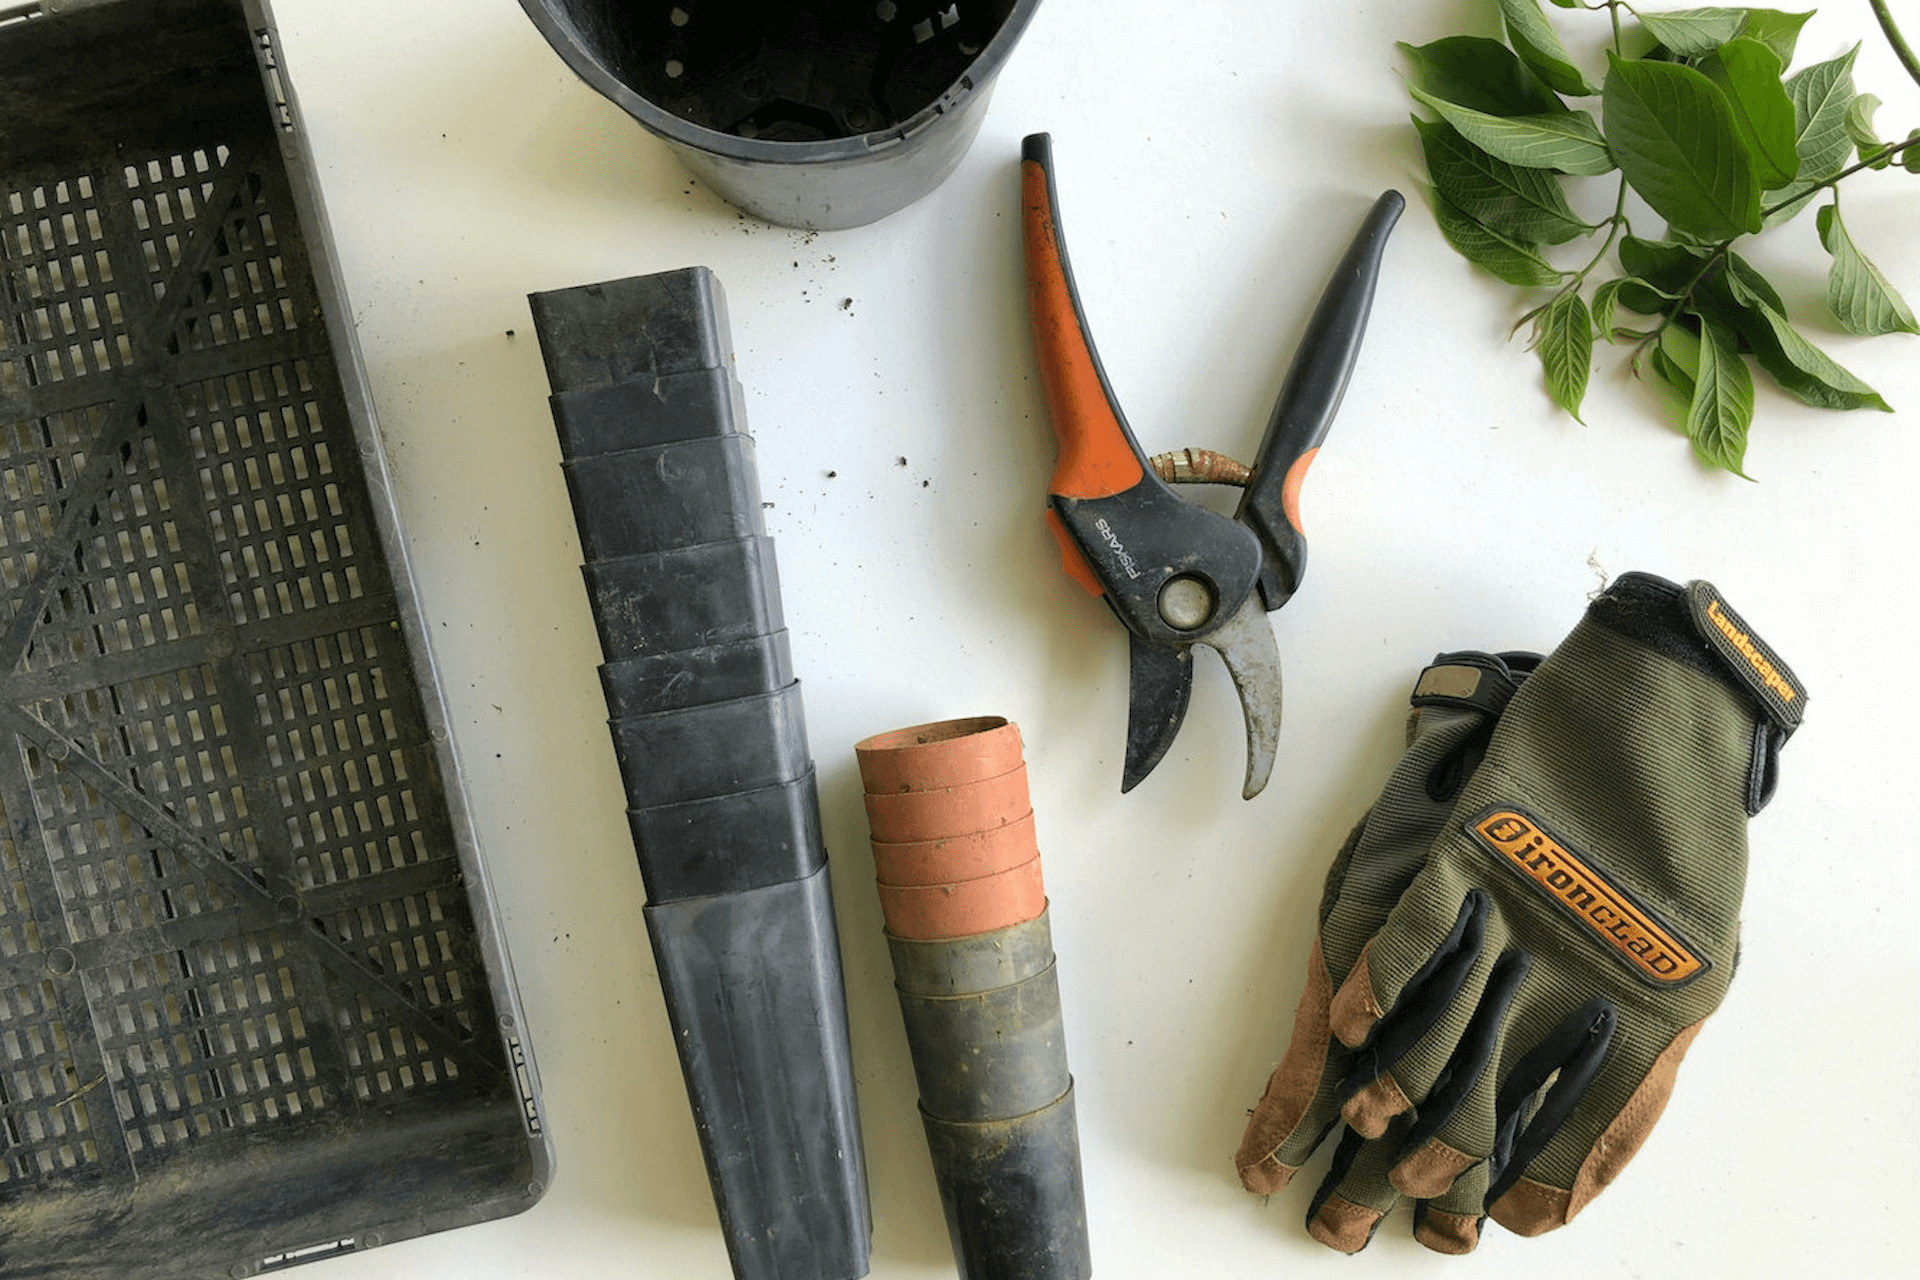 garden tools - a pair of gloves, a pruner and pots